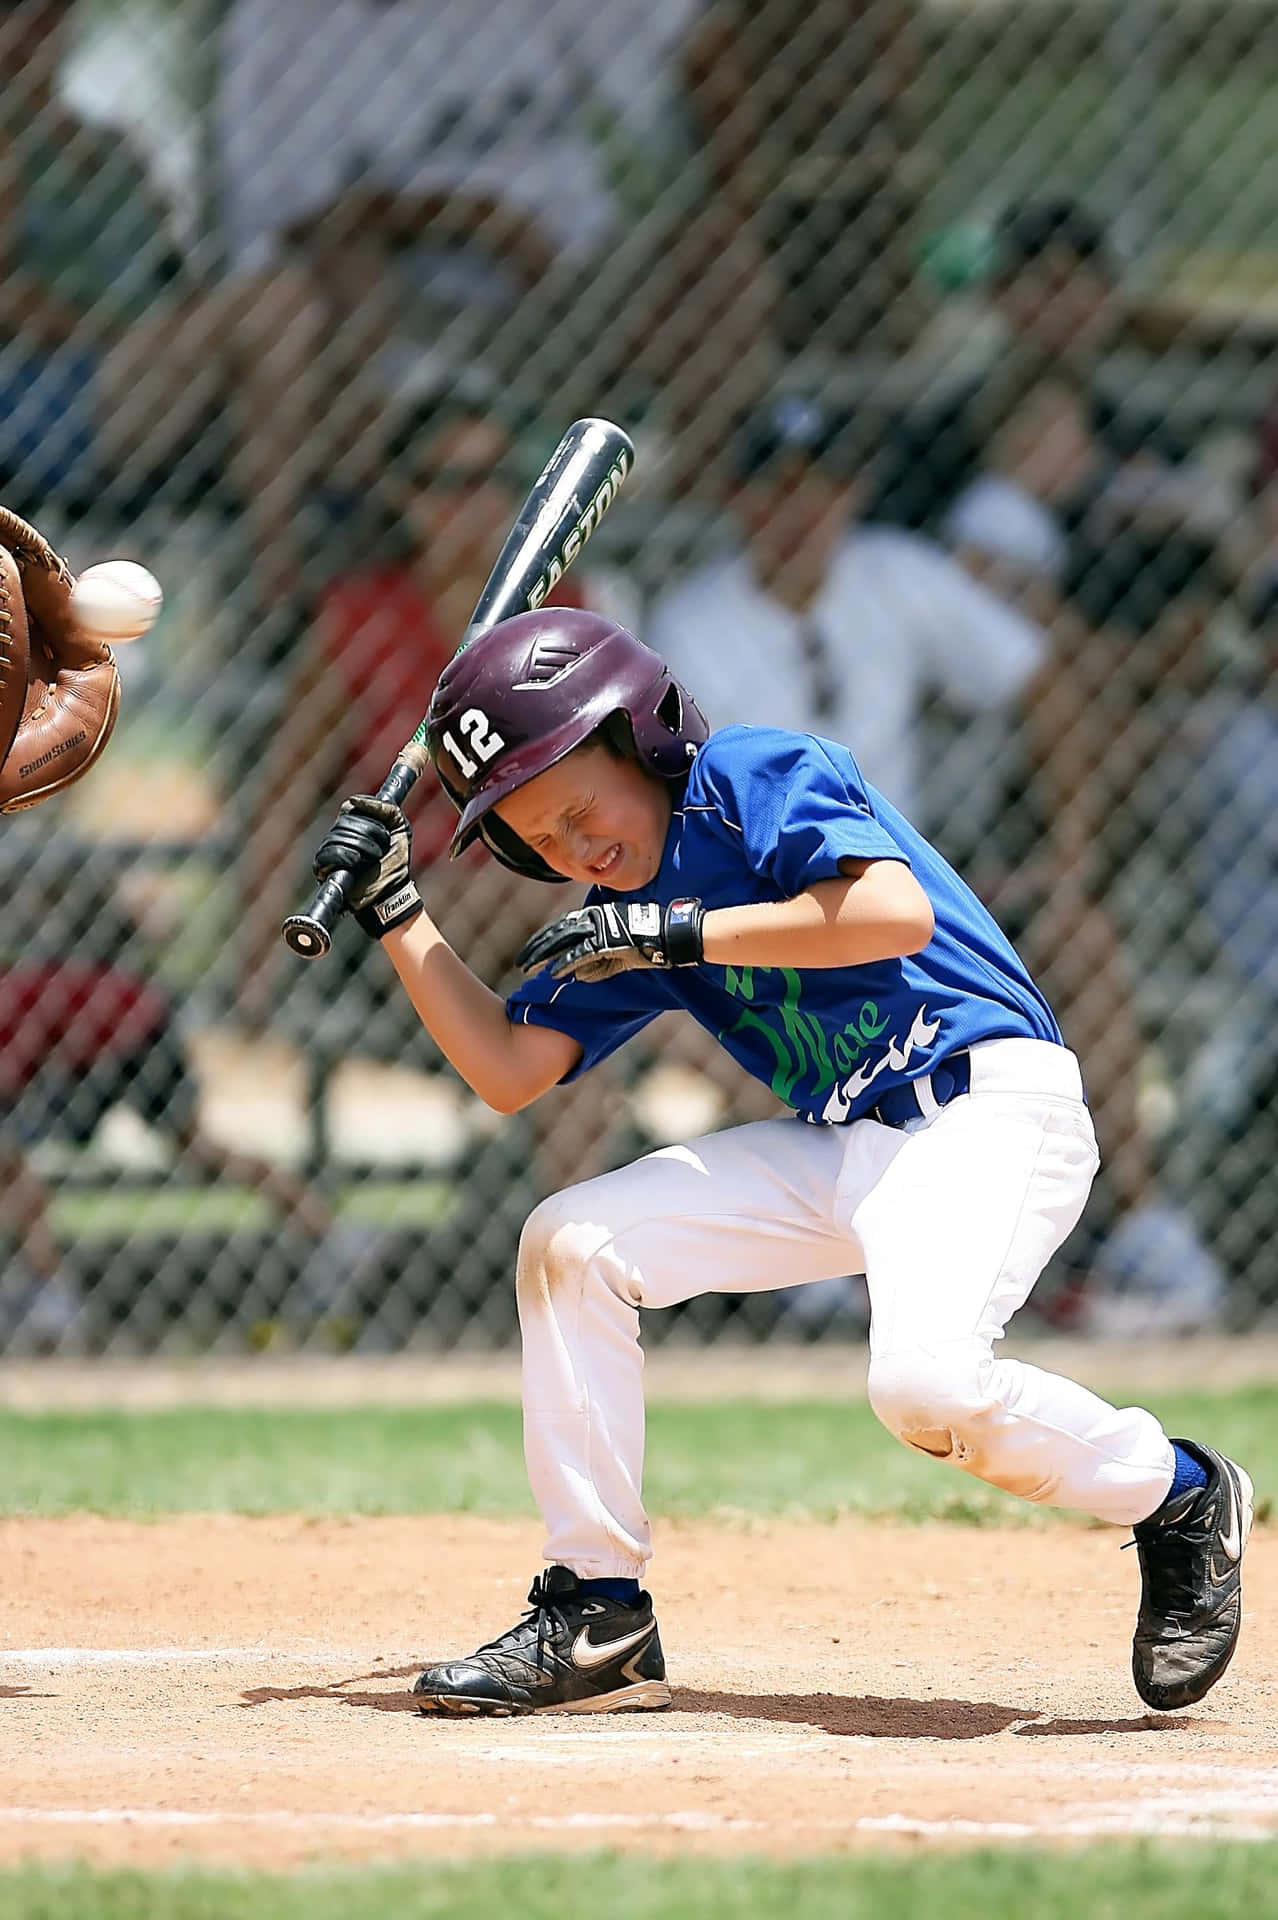 Little League Baseball team in action on the field Wallpaper